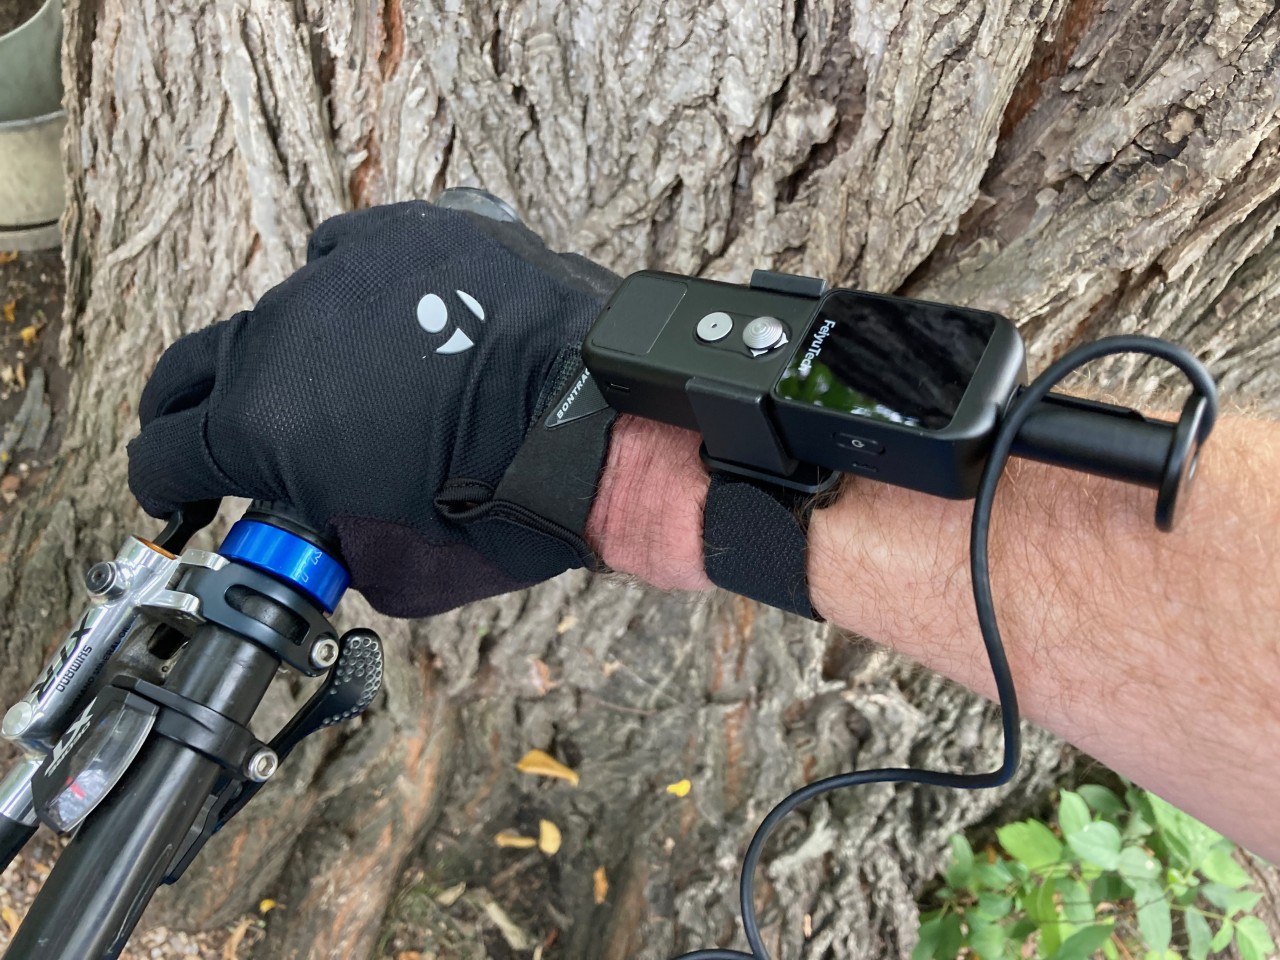 The Pocket 2S handle can be wrist-mounted, as seen here